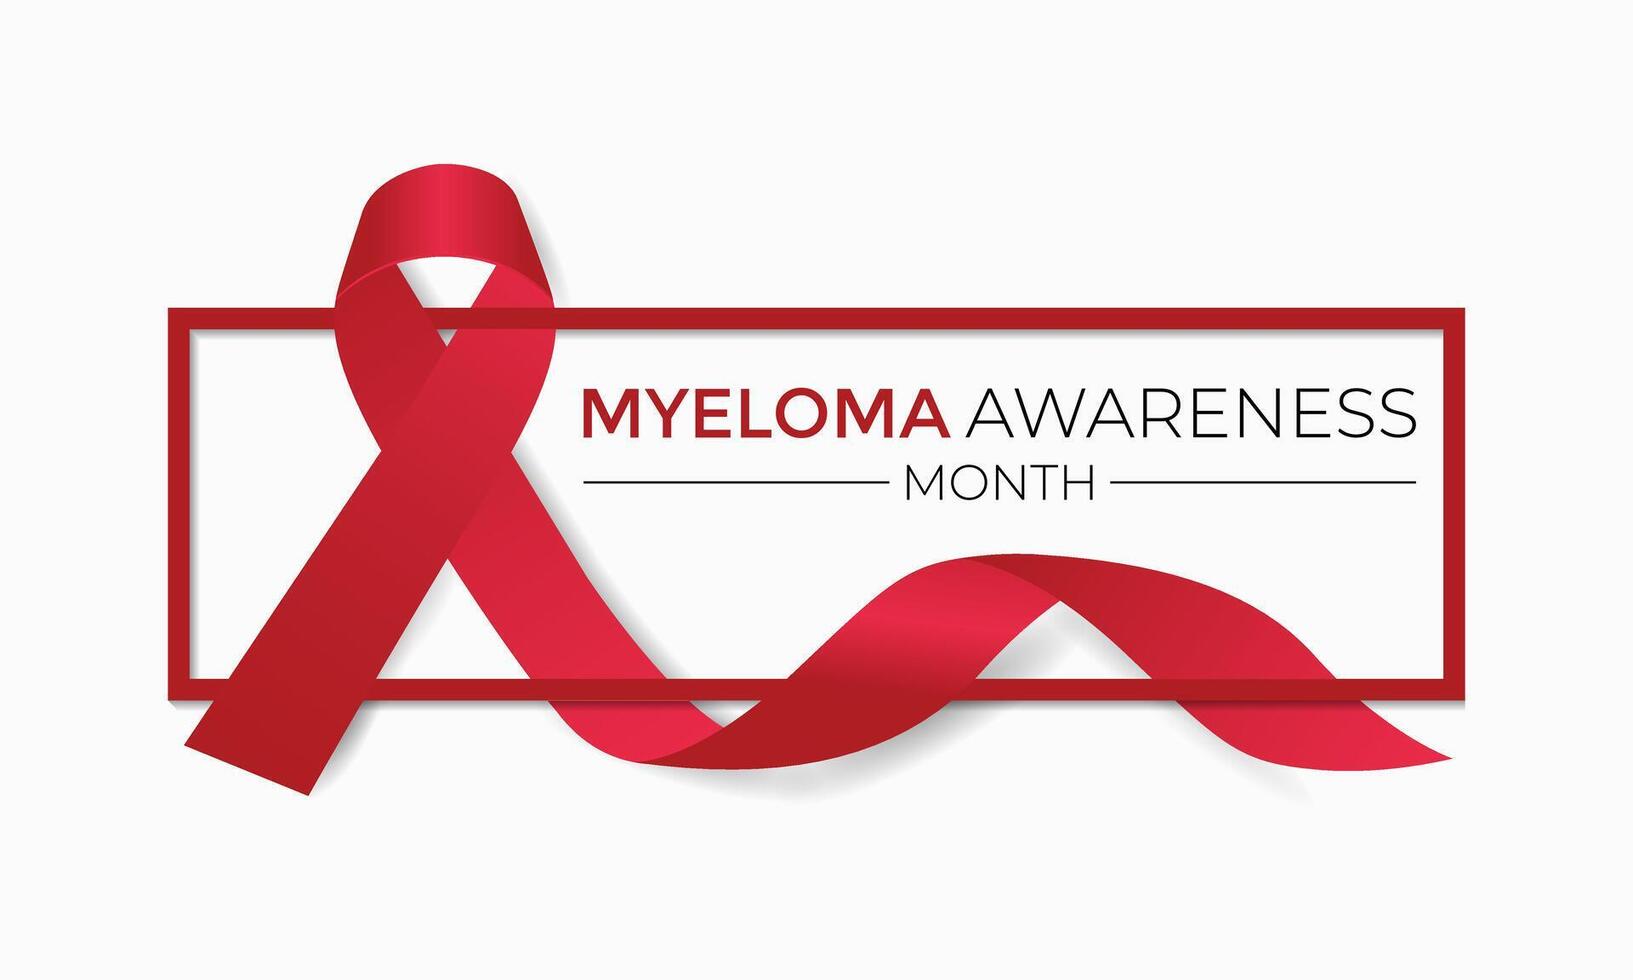 Myeloma awareness month is observed every year in March. vector illustration of  background design.